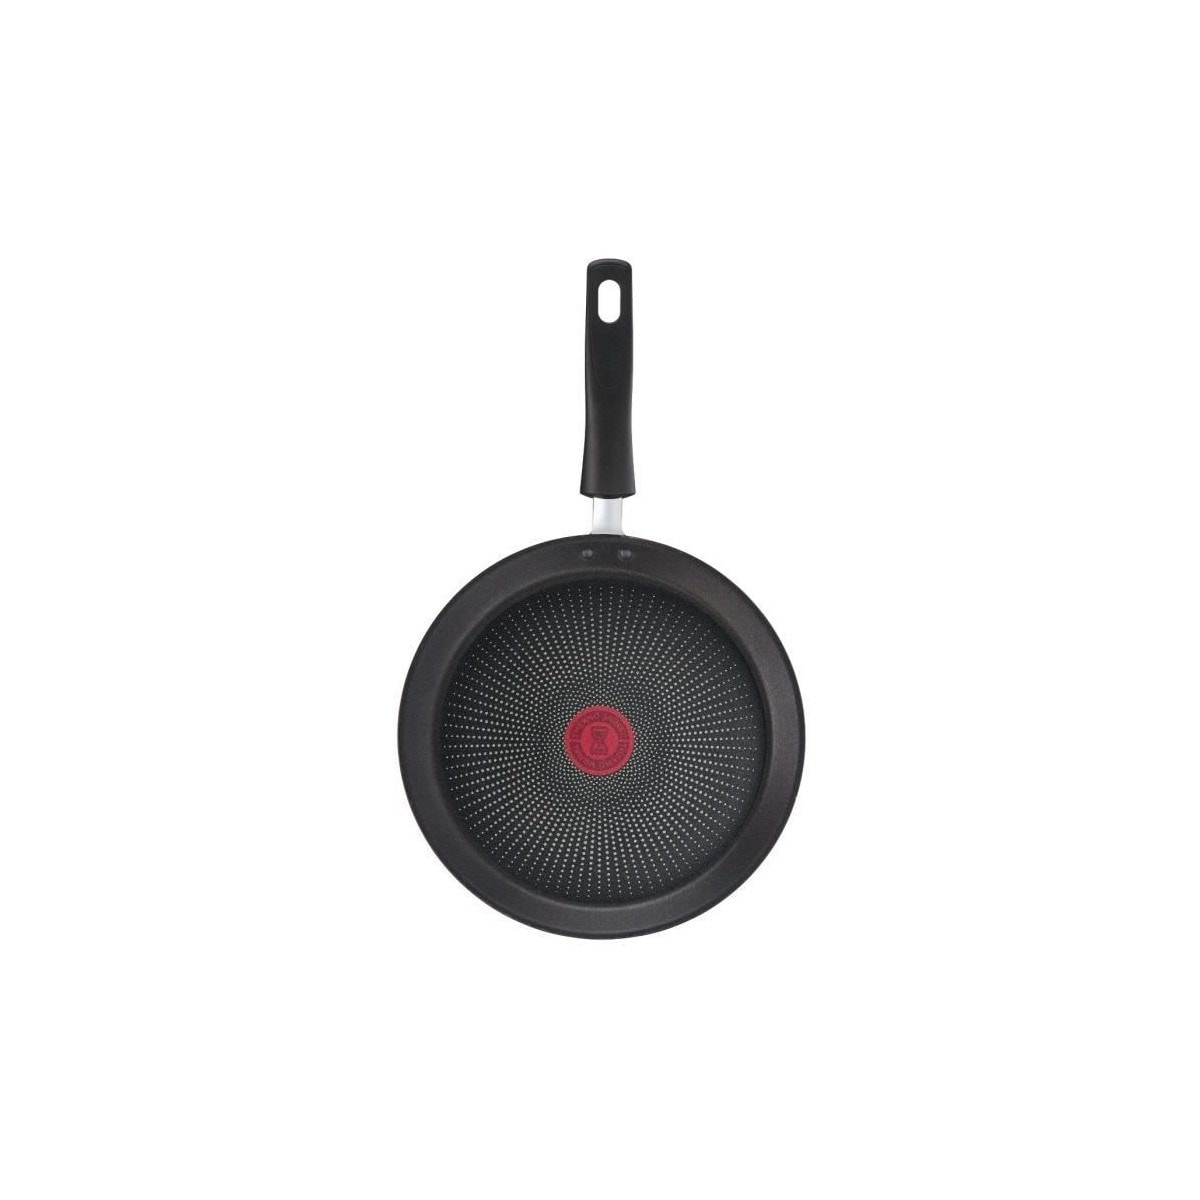 Tefal g2543802 poele a crepe 25 cm eco-respect - antiadhesive - tous feux  dont induction - made in france TEFAL Pas Cher 